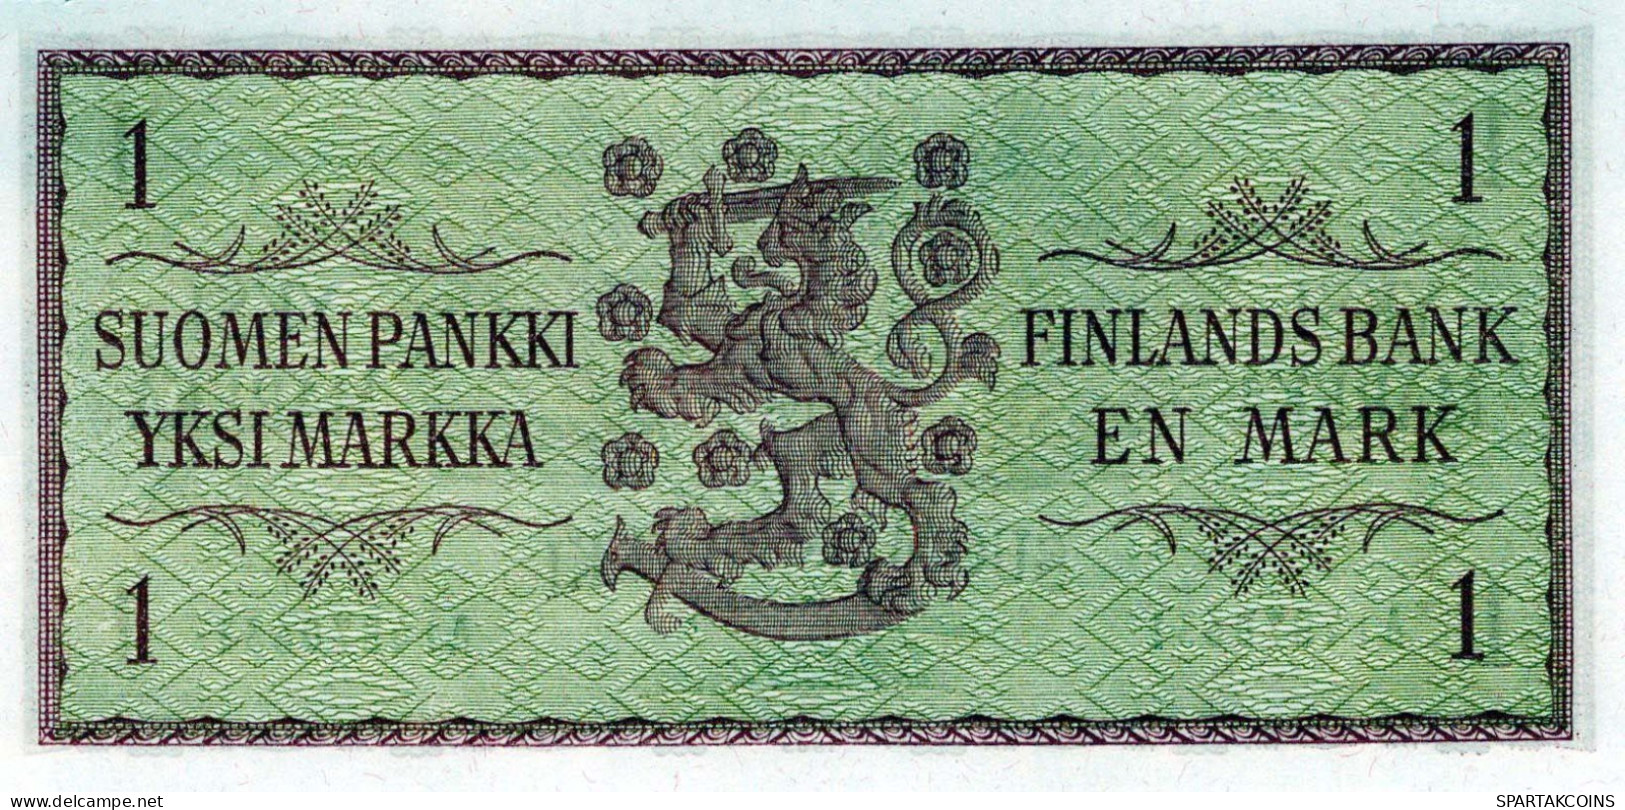 1 MARK 1963 FINLAND Papiergeld Banknote #PJ576 - [11] Local Banknote Issues